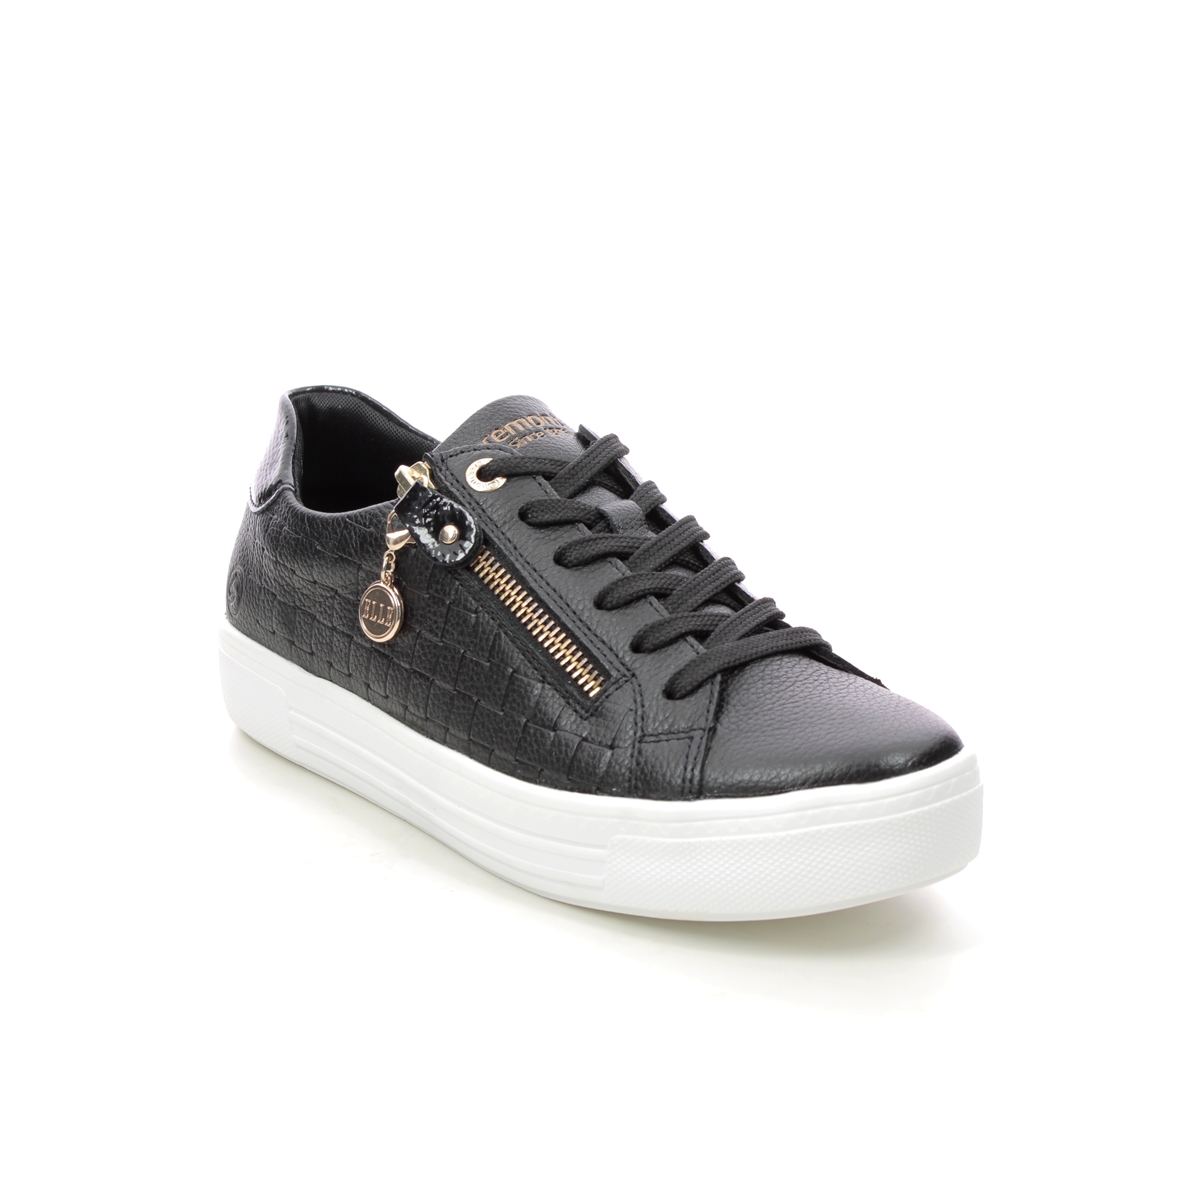 Remonte Altozip Elle Black Leather Womens Trainers D0916-00 In Size 40 In Plain Black Leather